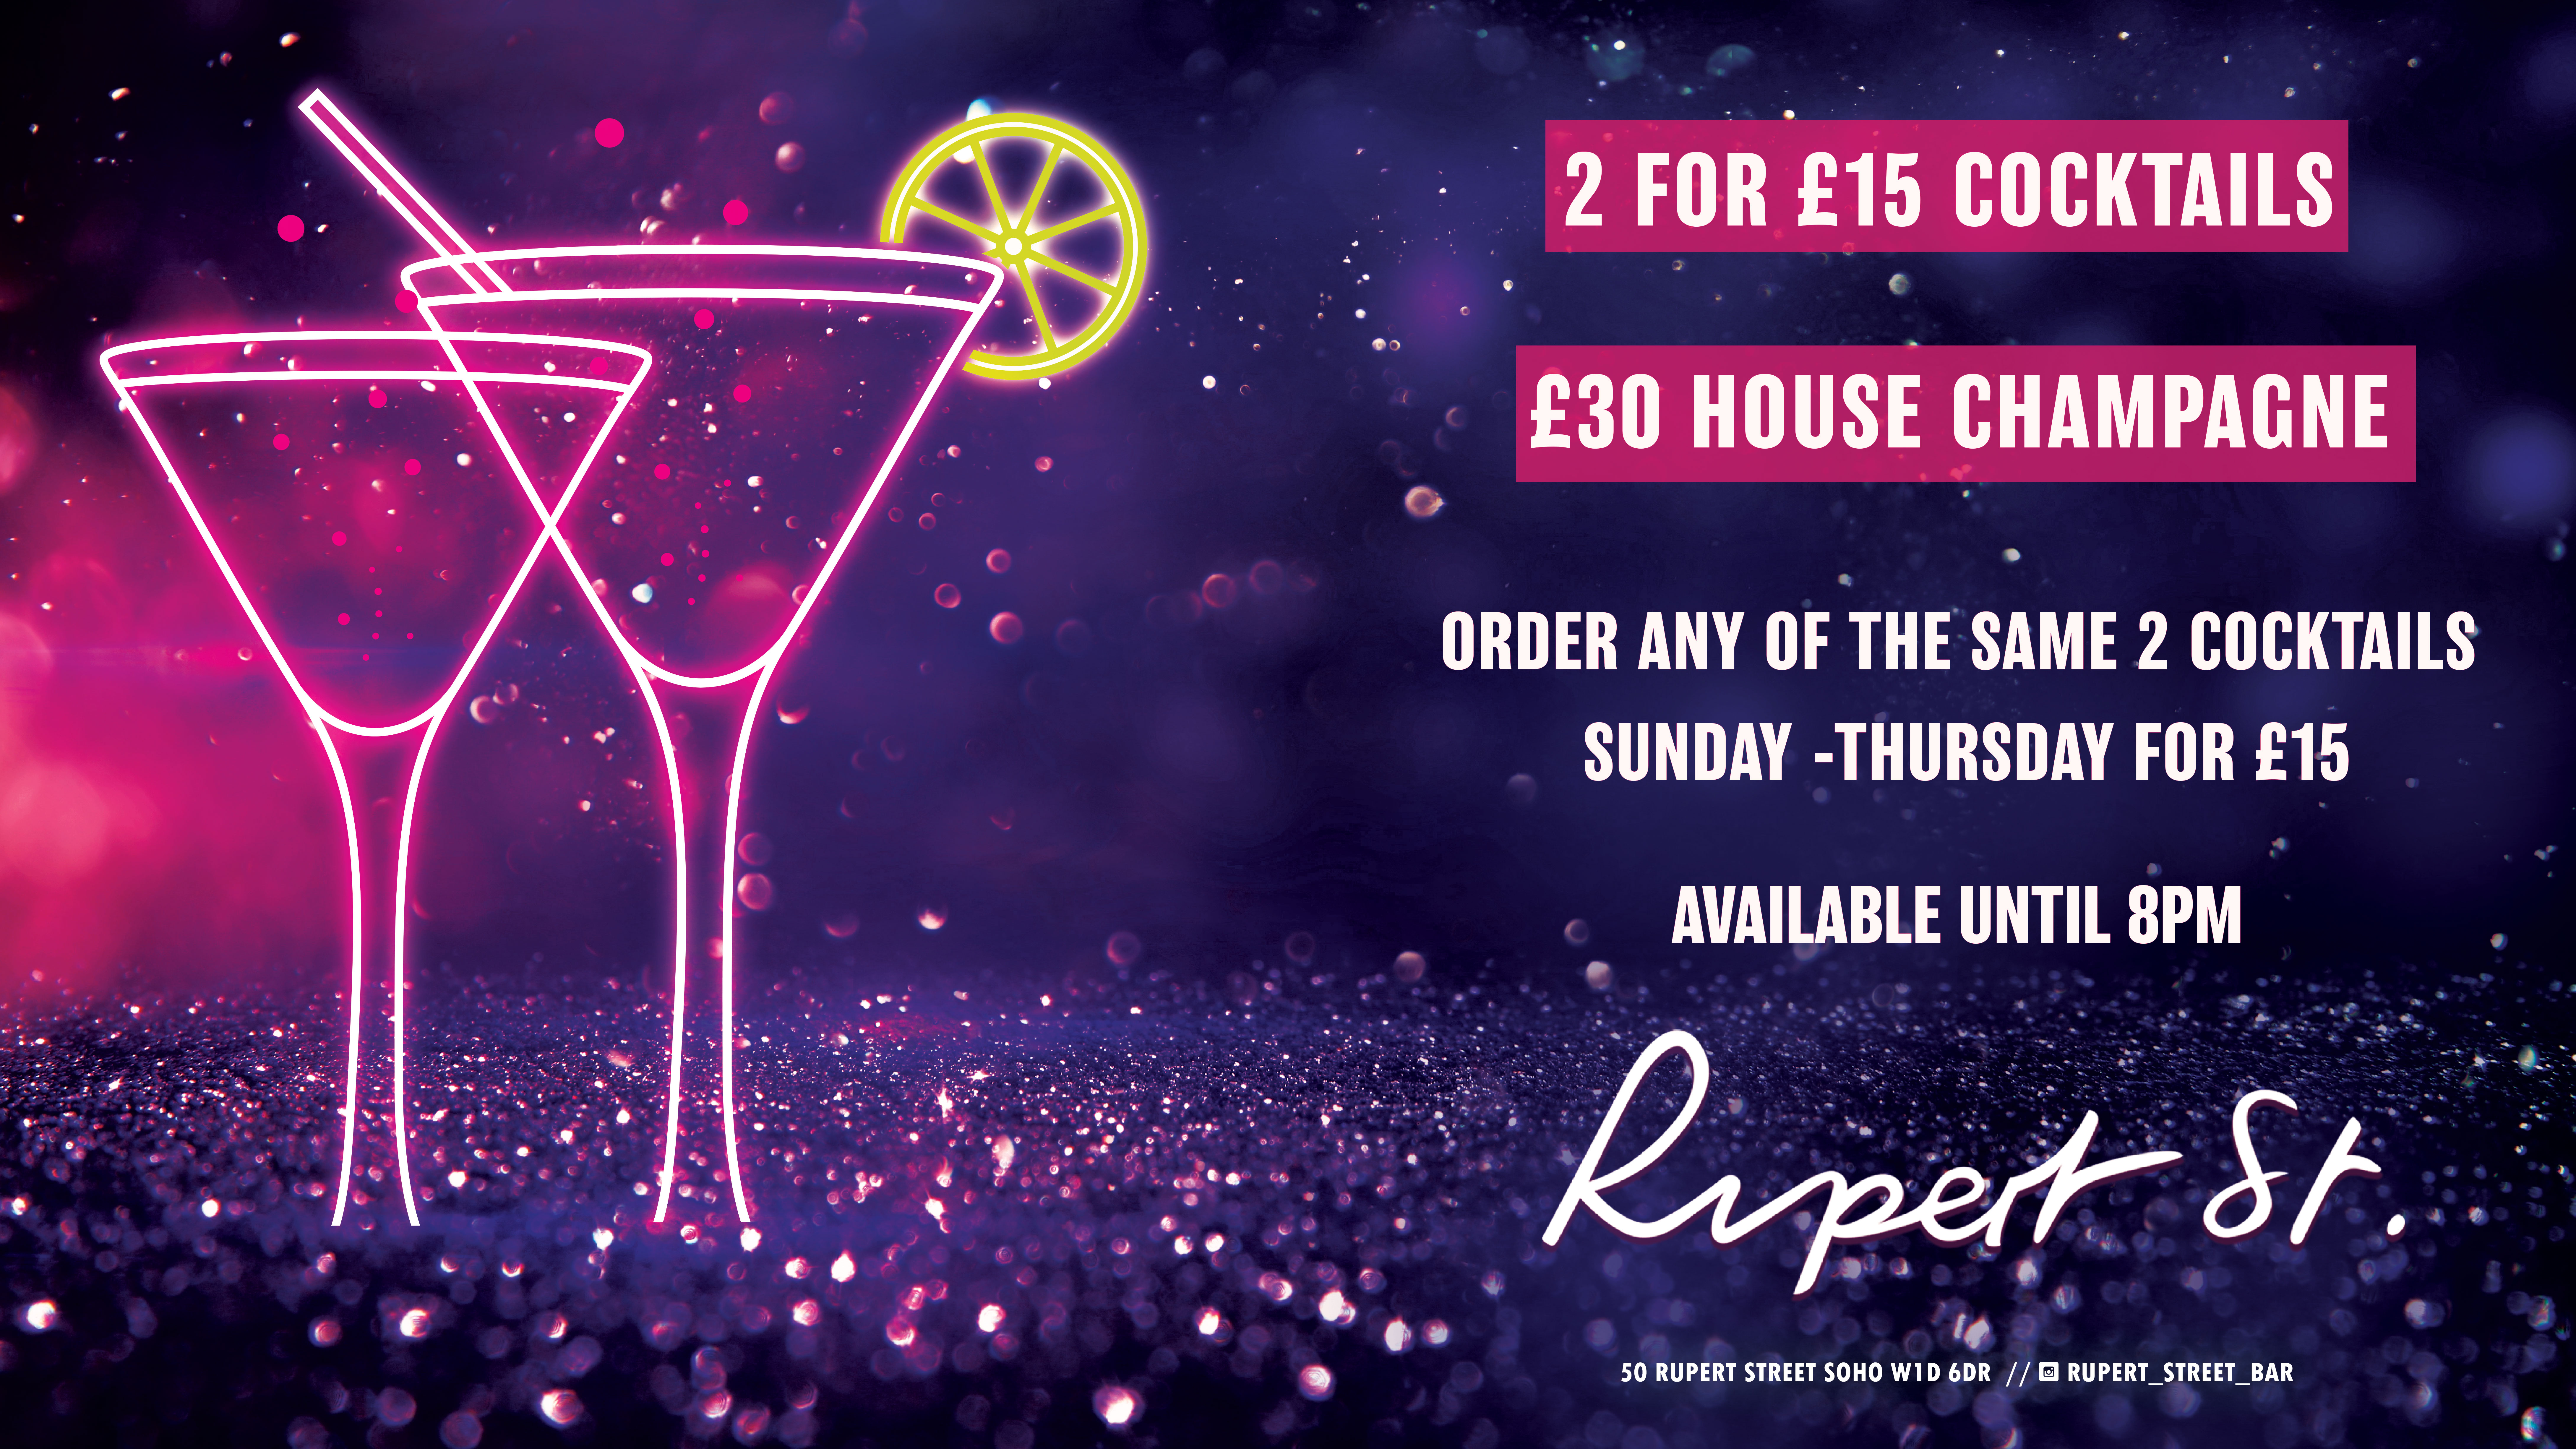 2 for 15 cocktails 30 house champagne until 8pm